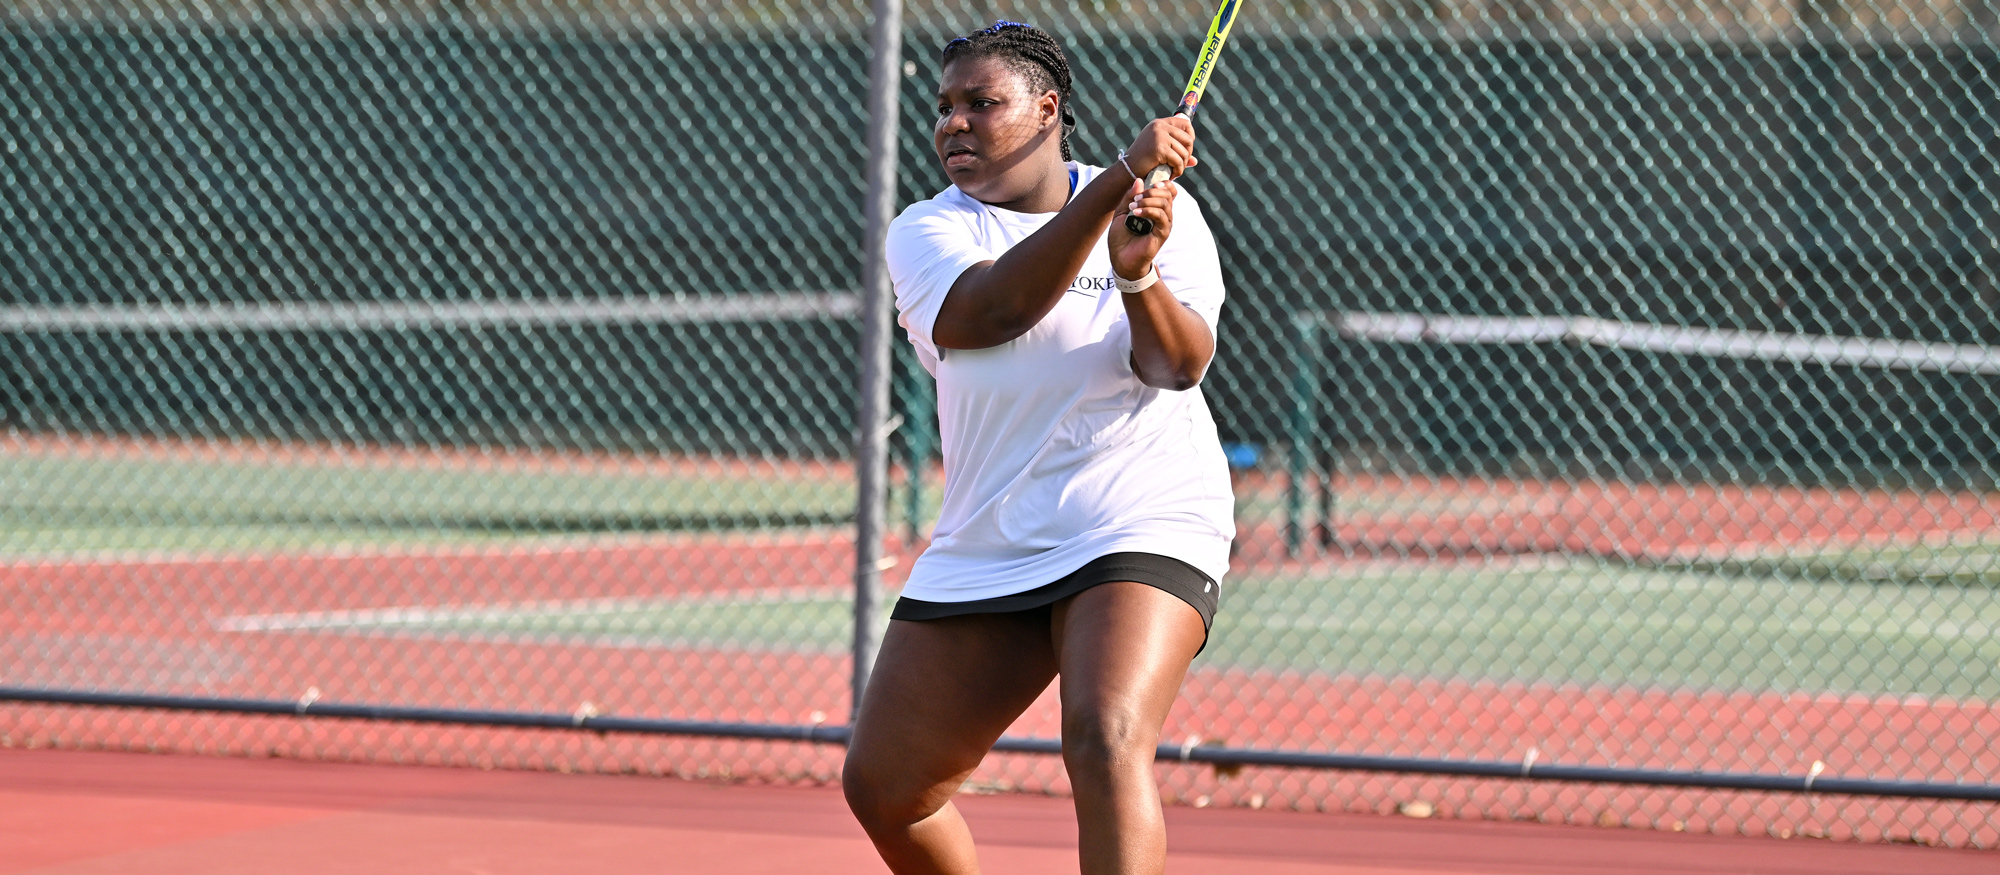 Kennedy Bagley-Fortner swept her opponents at third doubles and sixth singles in Mount Holyoke's 9-0 win over Gordon College on Feb. 24, 2024. (RJB Sports file photo)